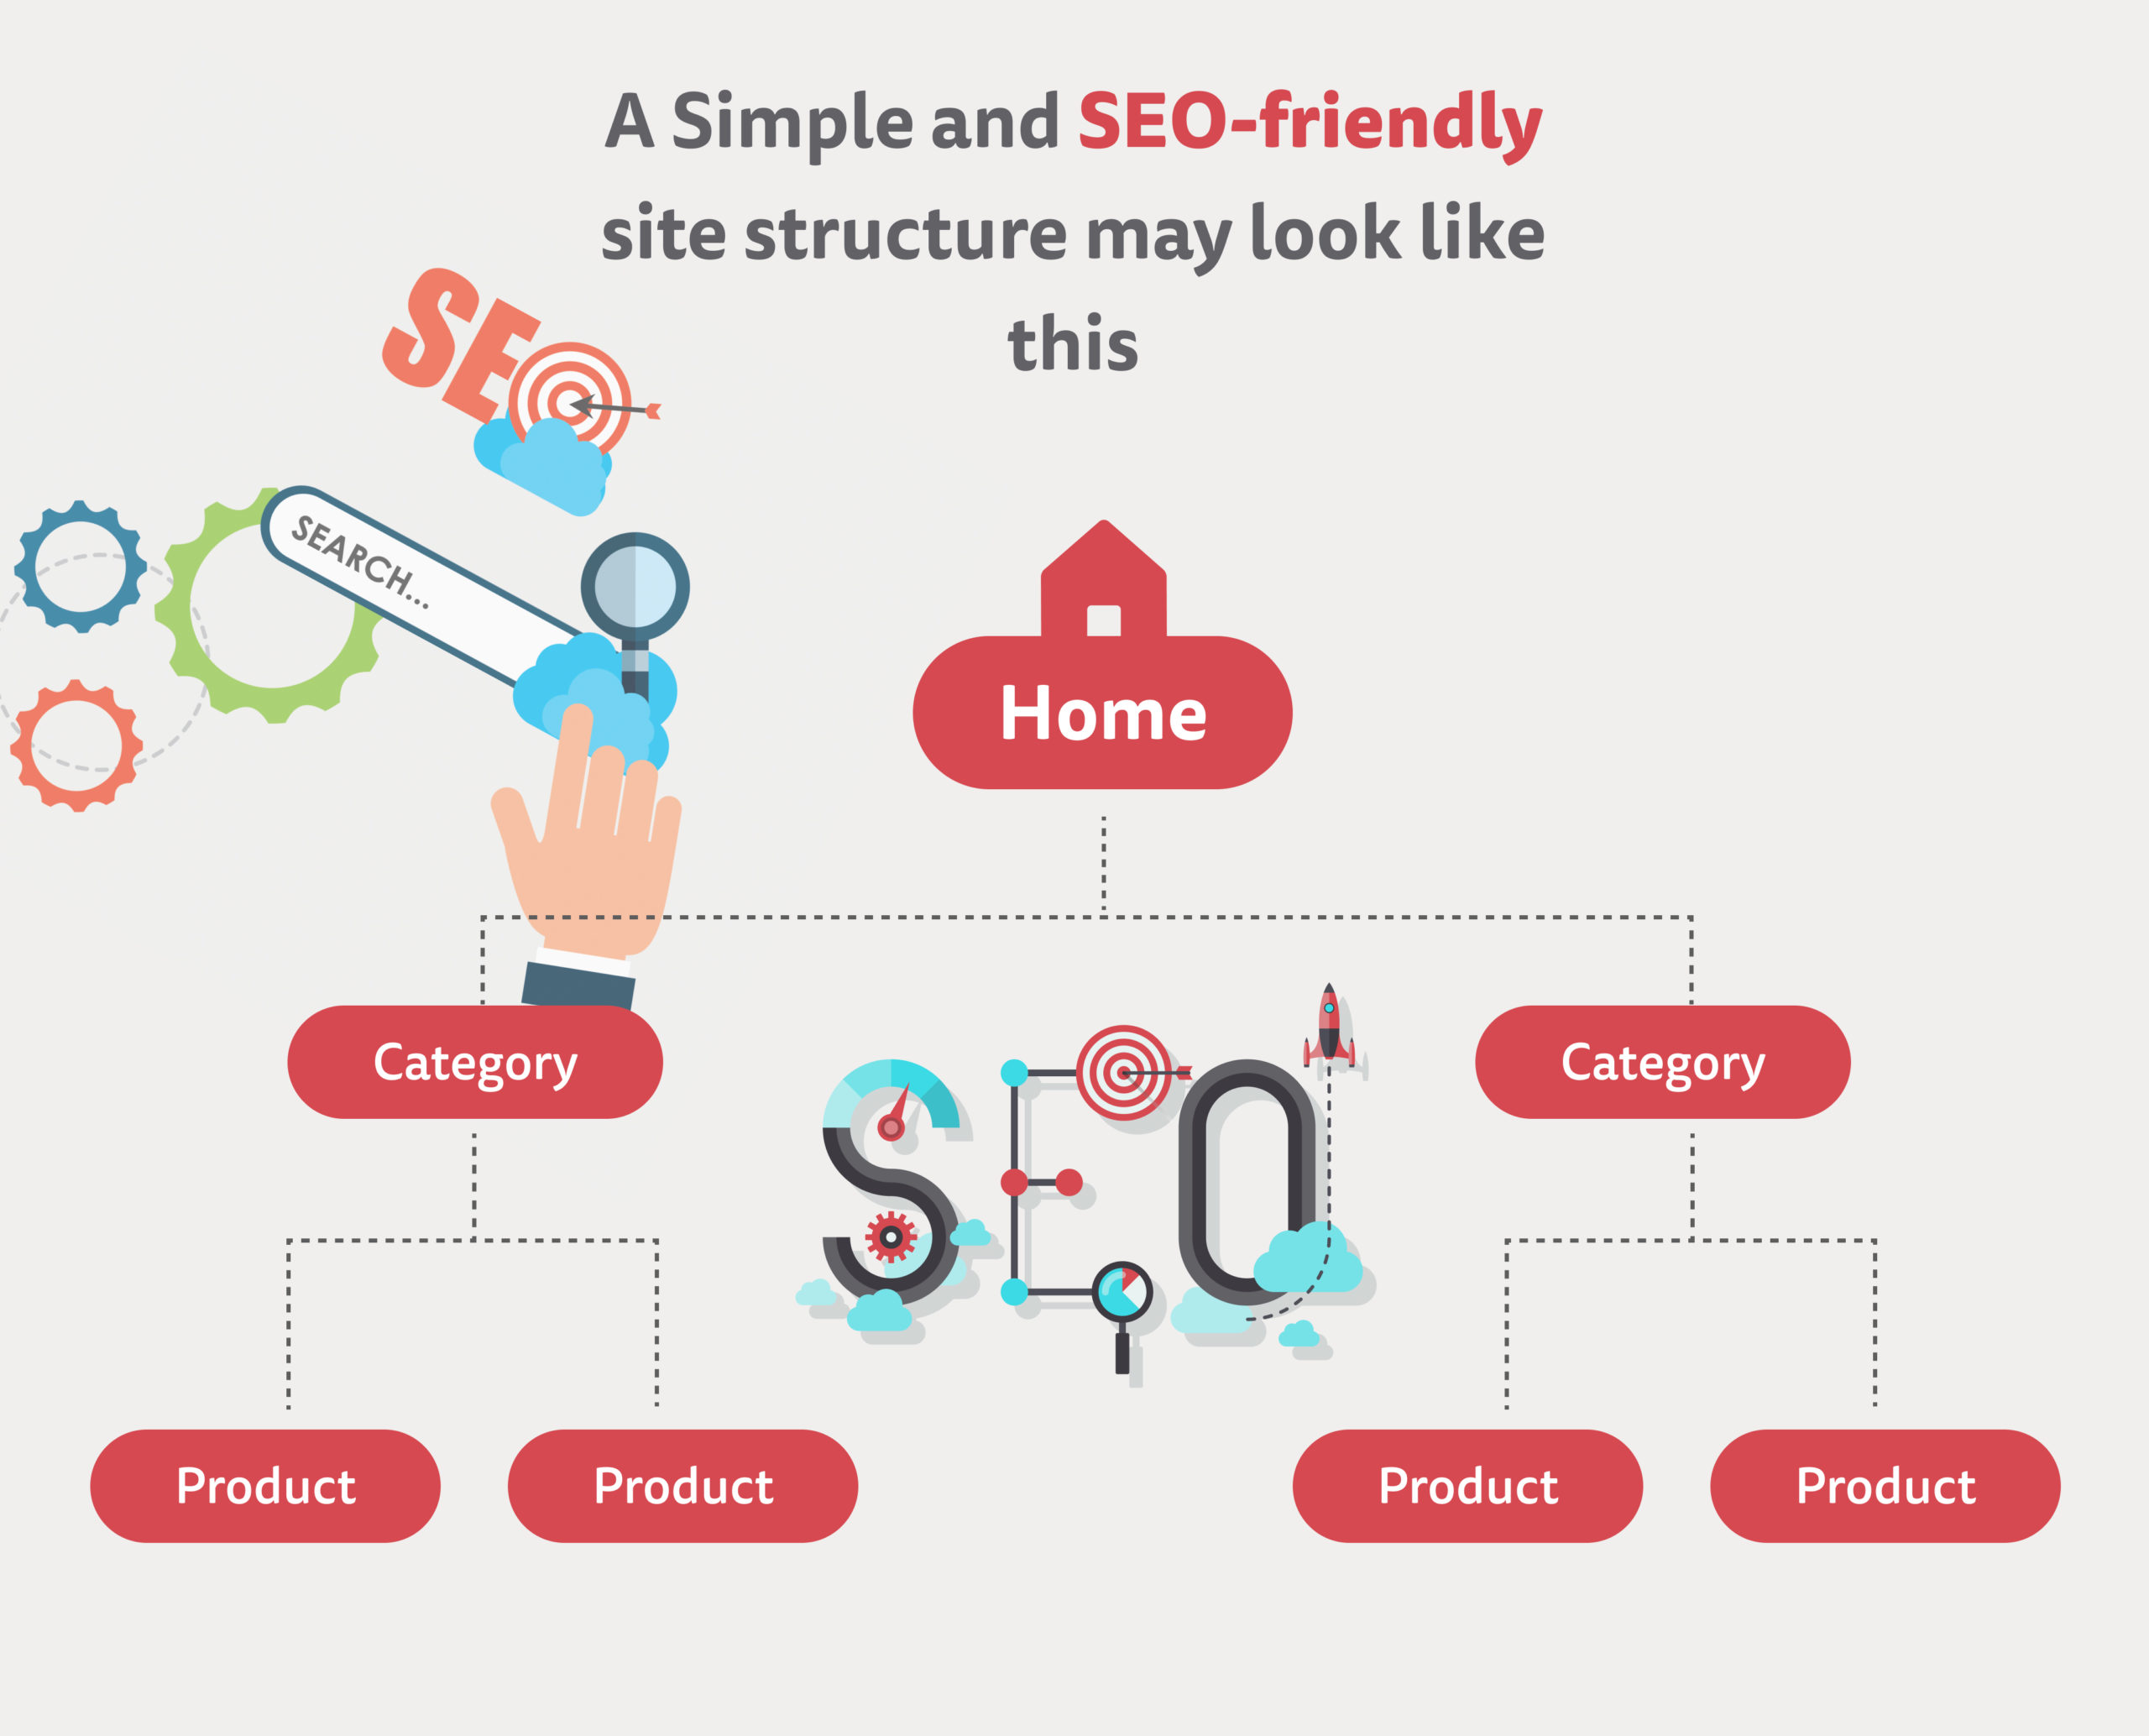 seo friendly site structure